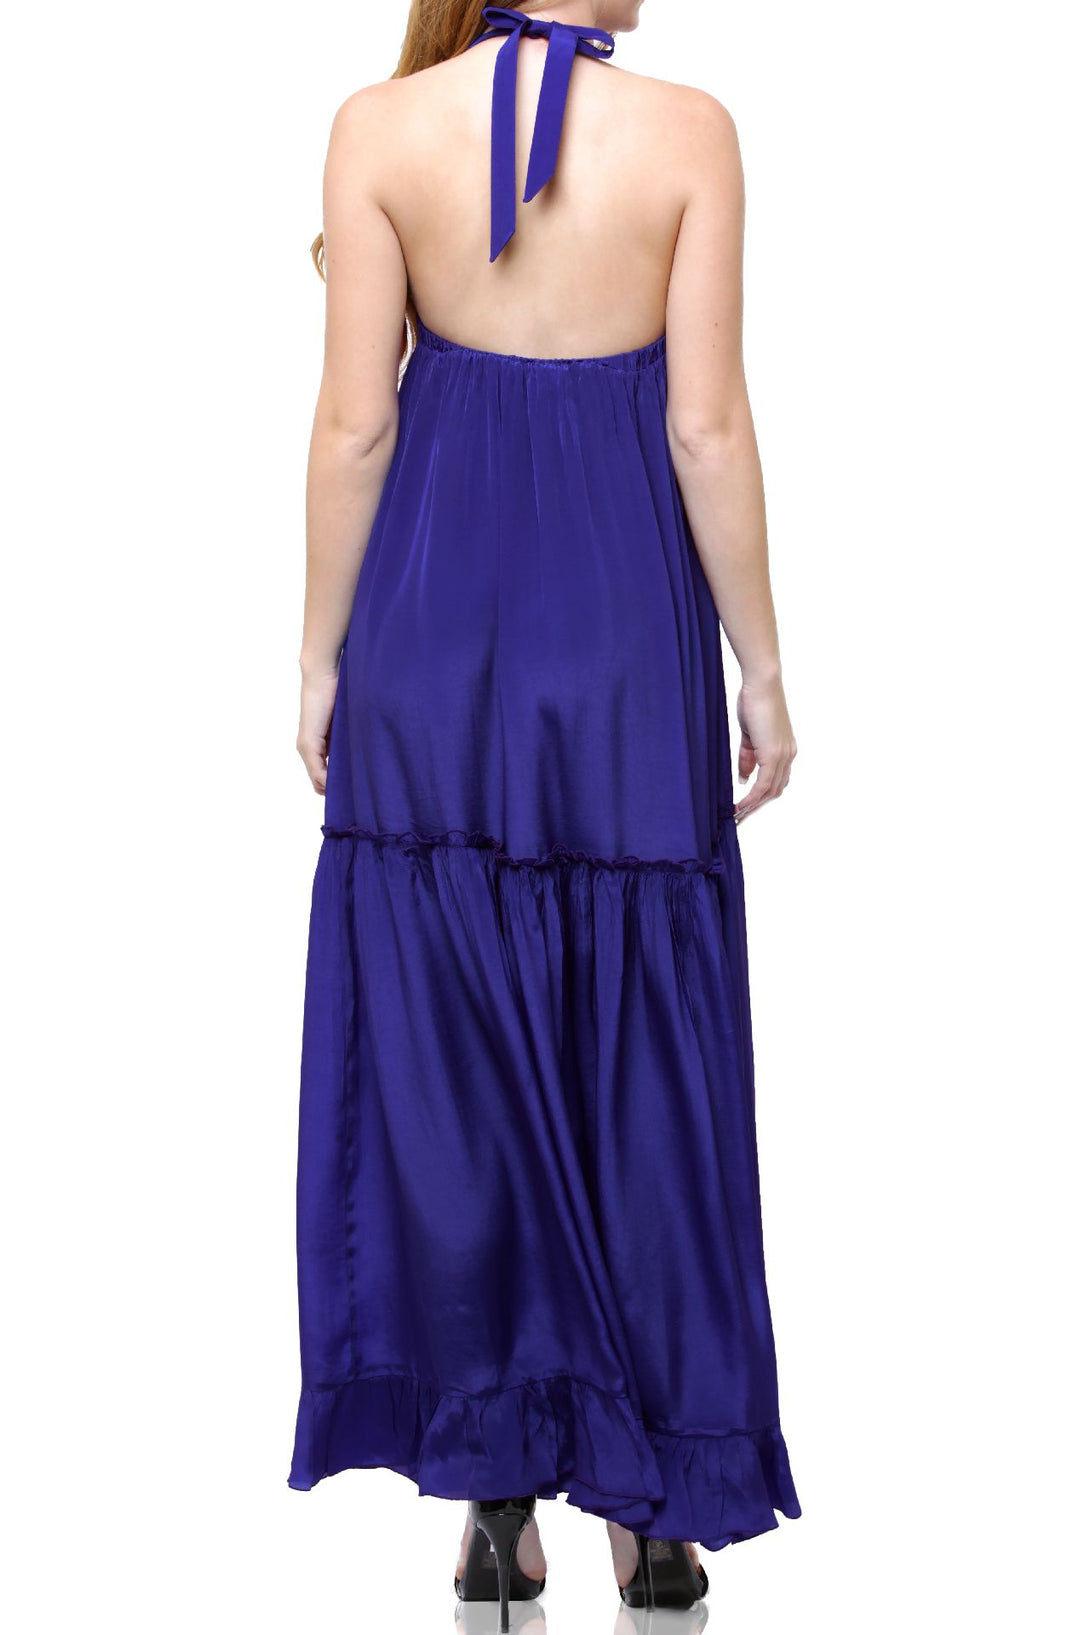  navy long dress with sleeves, formal dresses for women, plunging neckline cocktail dress,